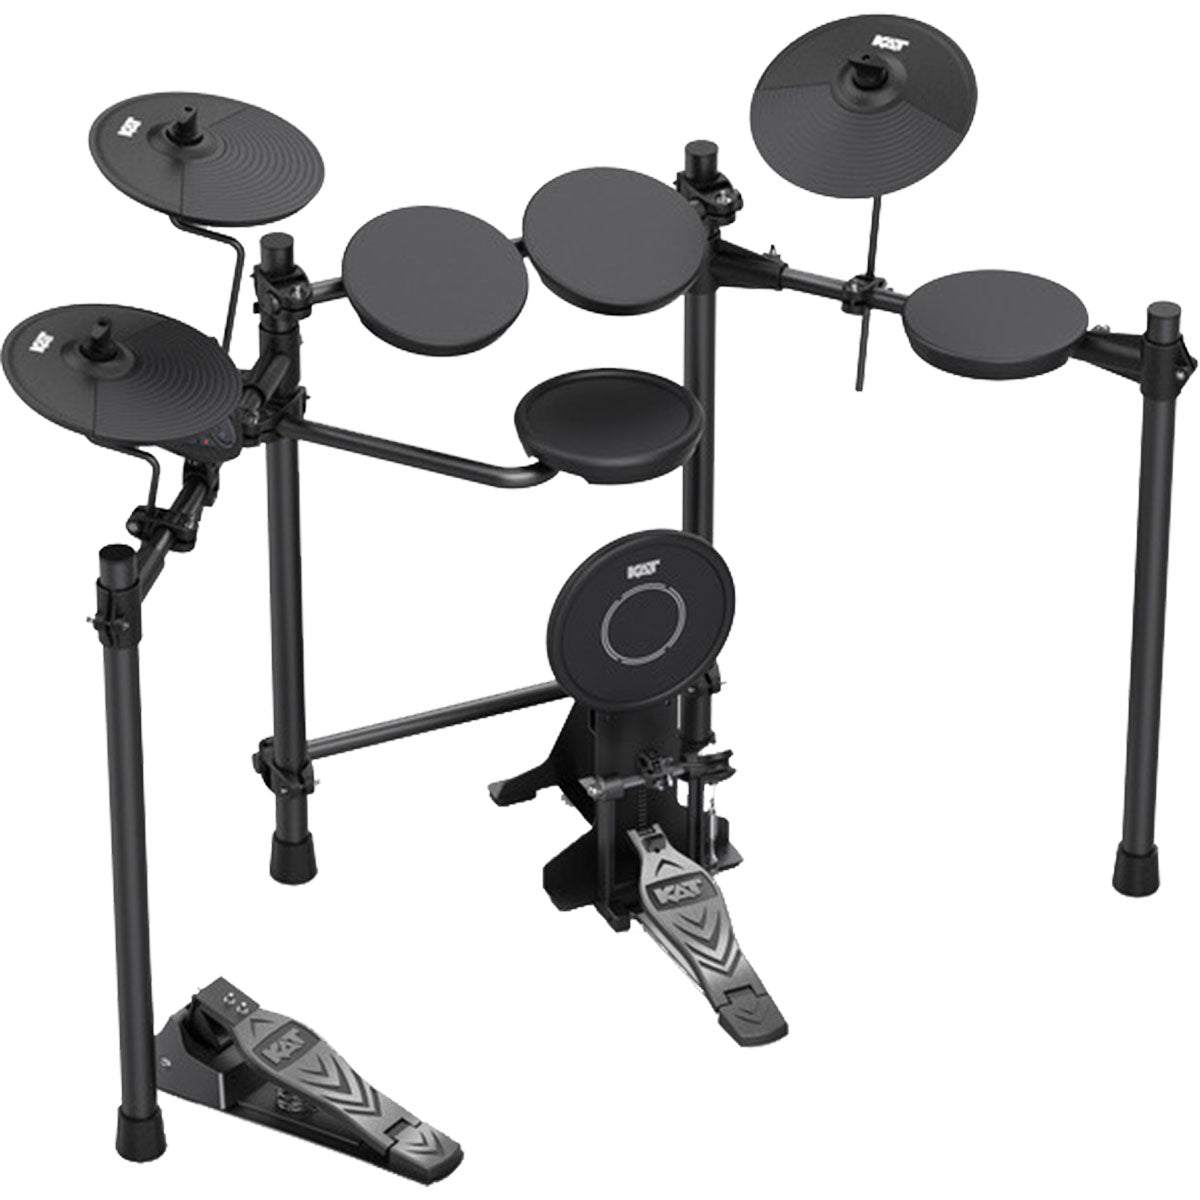 3/4 view of Kat Percussion KT-100 Electronic Drum Set showing top, back and right side